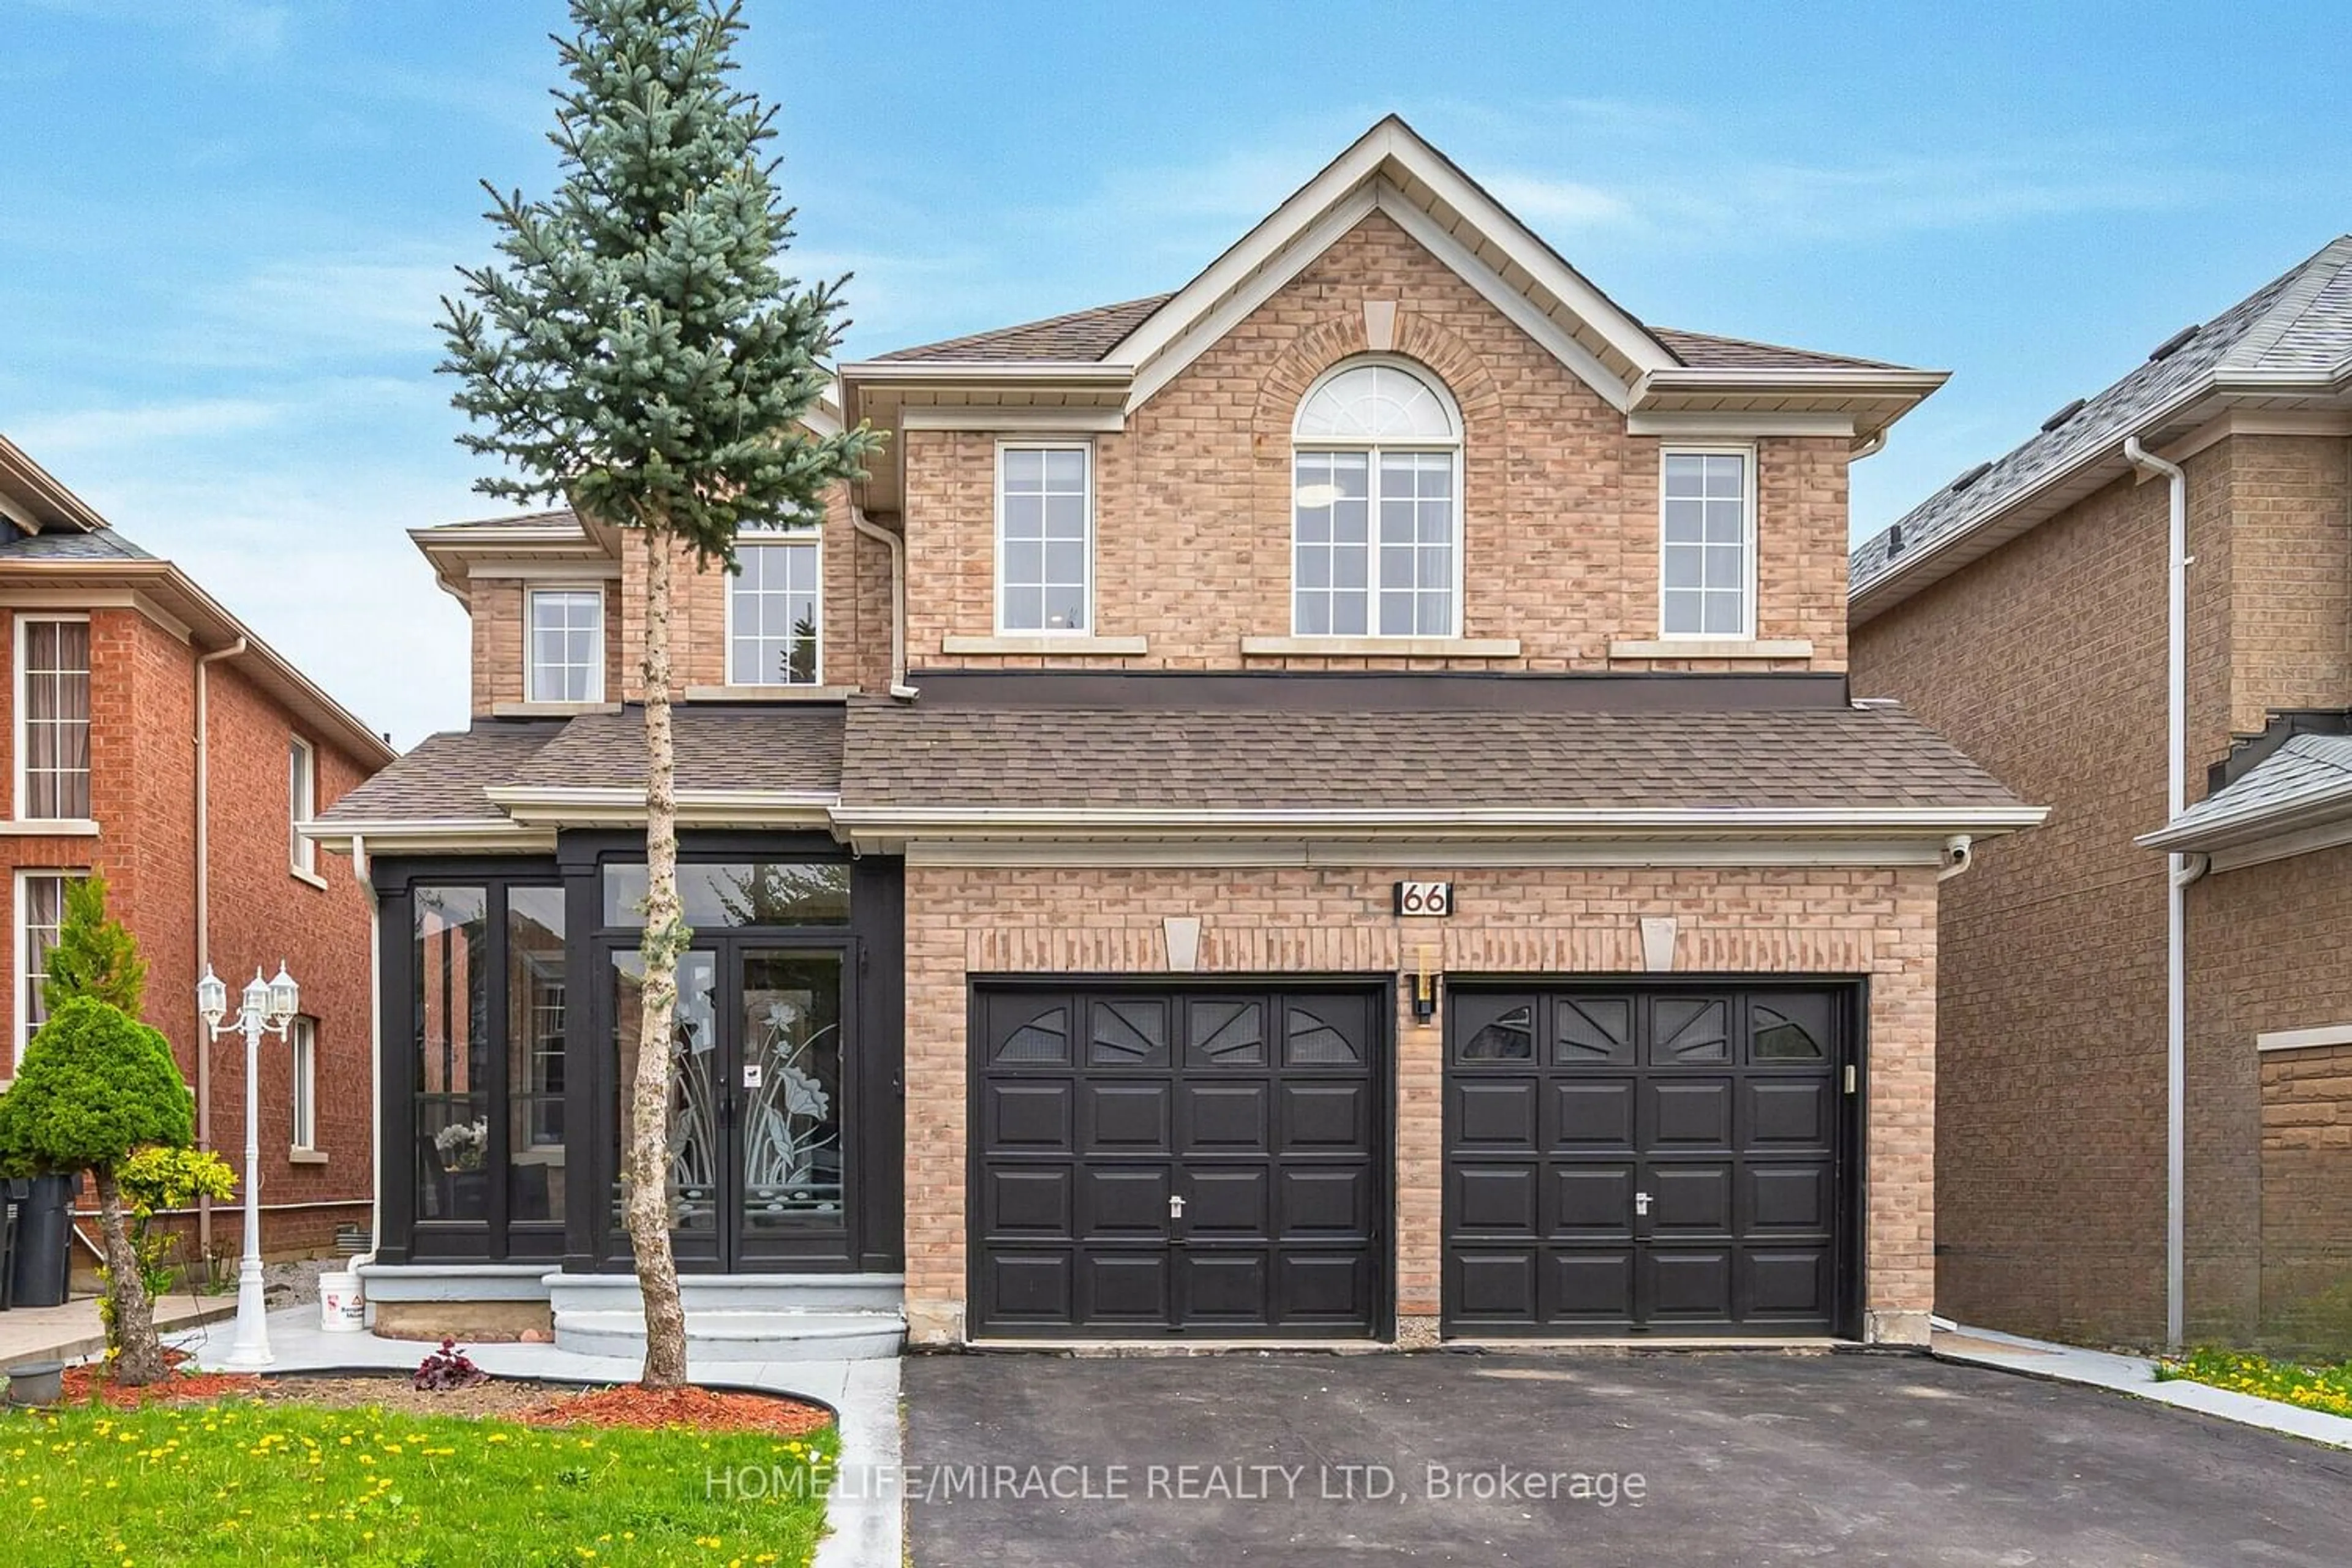 Home with brick exterior material for 66 Olde Town Rd, Brampton Ontario L6X 4X9